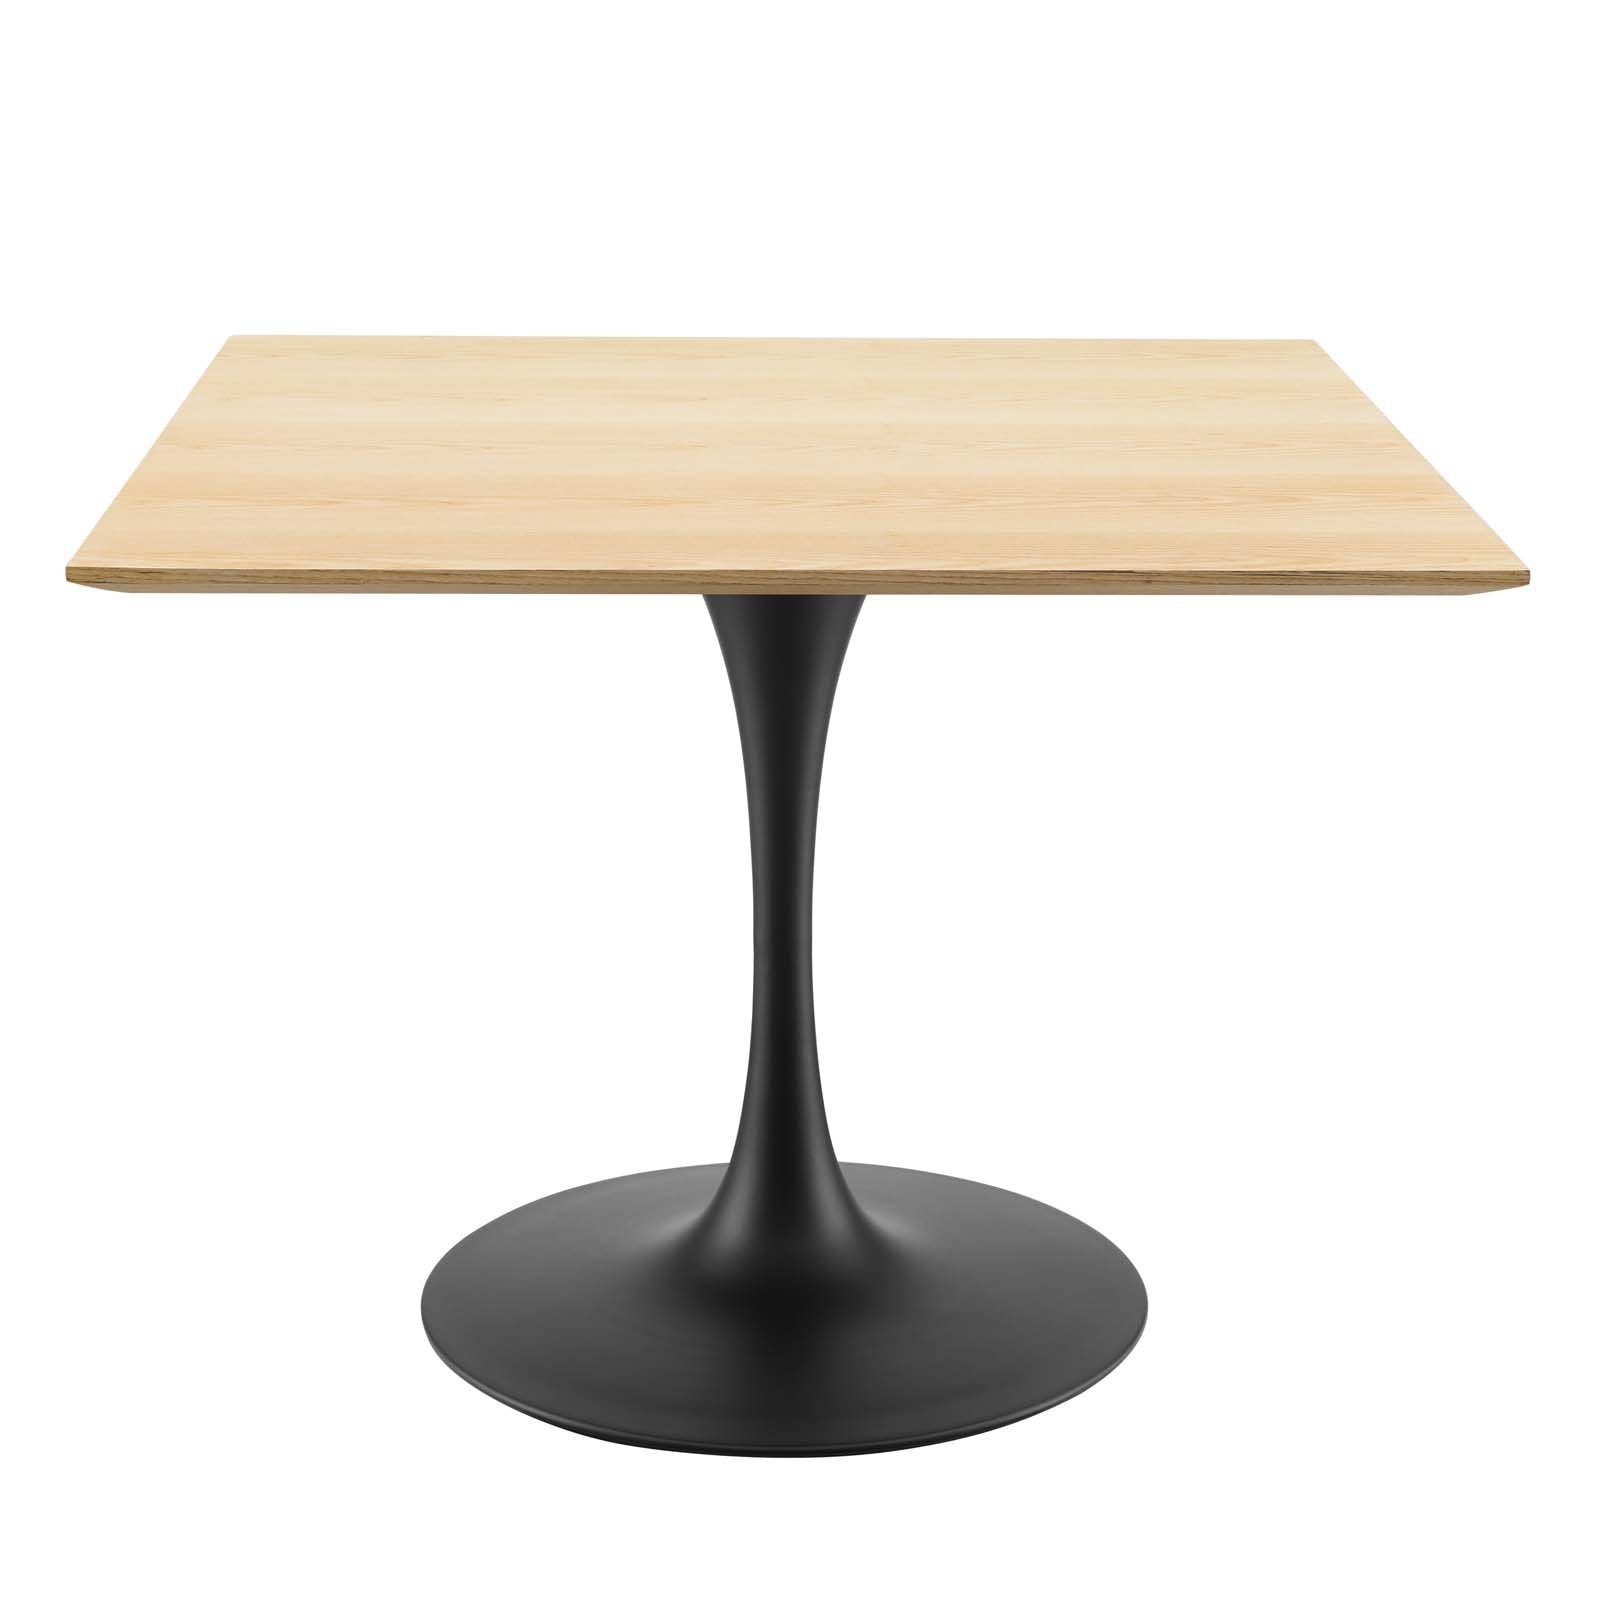 Lippa 40" Wood Square Dining Table - East Shore Modern Home Furnishings